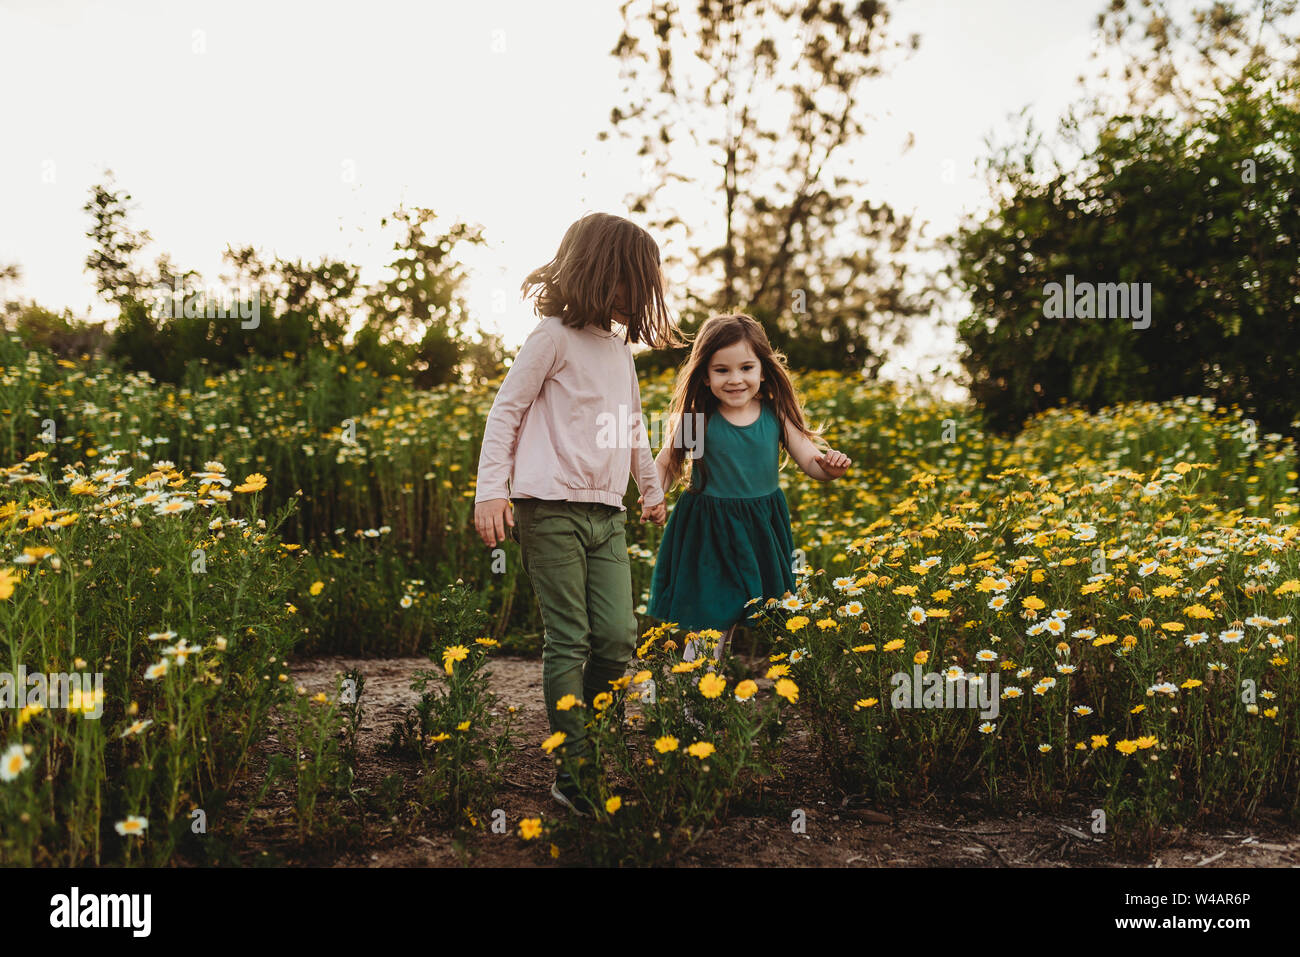 Smiling sisters running through a field of flowers in spring Stock Photo